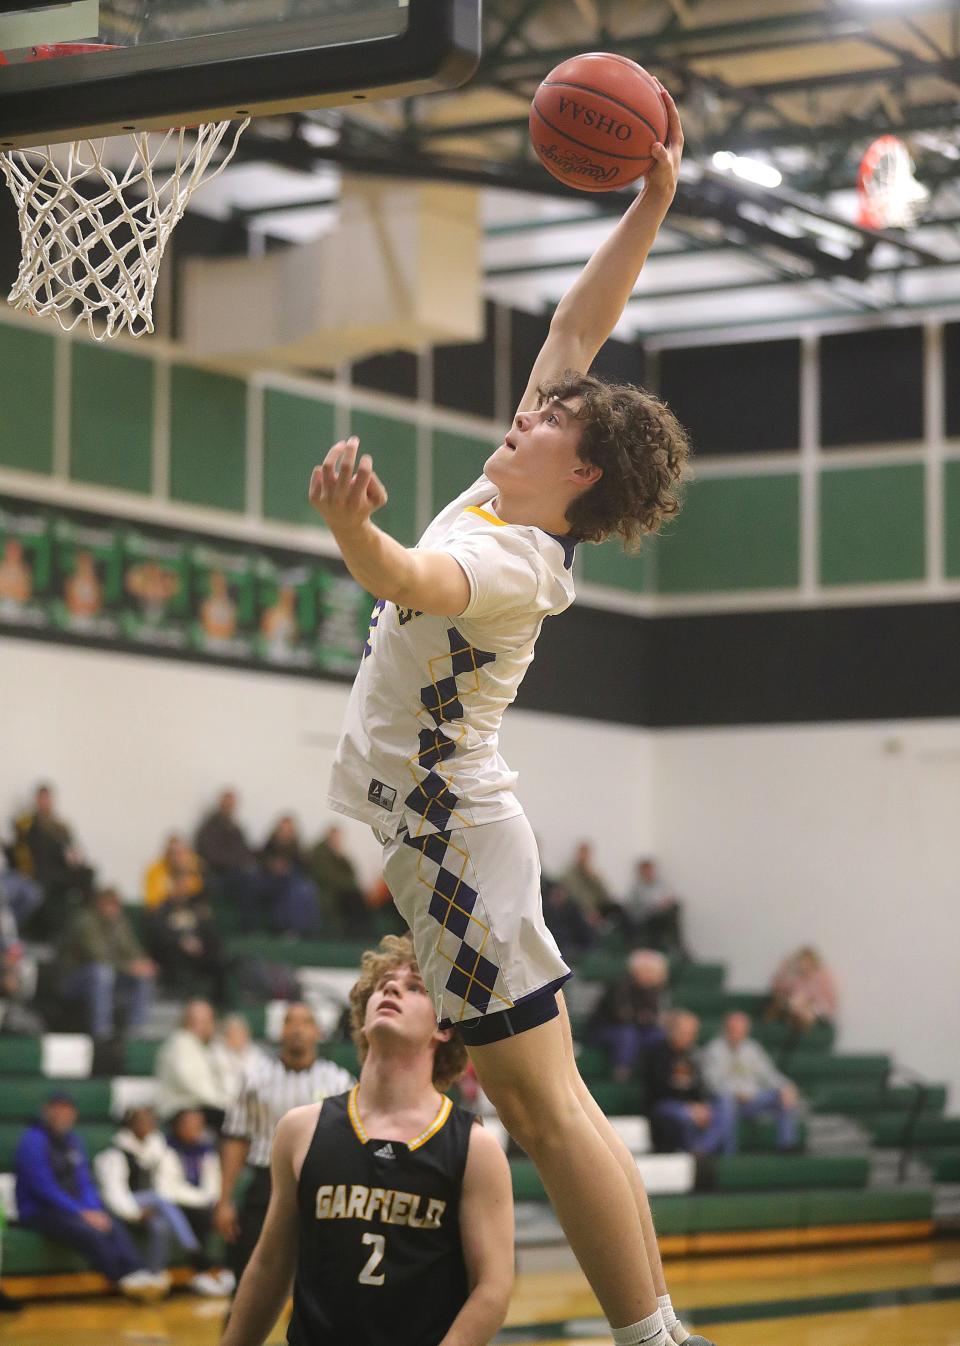 Kaden Davis of Tallmadge goes up for a dunk during the Greater Akron Basketball Coaches Association game on Tuesday, March 14, 2023 in Granger Township, Ohio, at Highland High School.